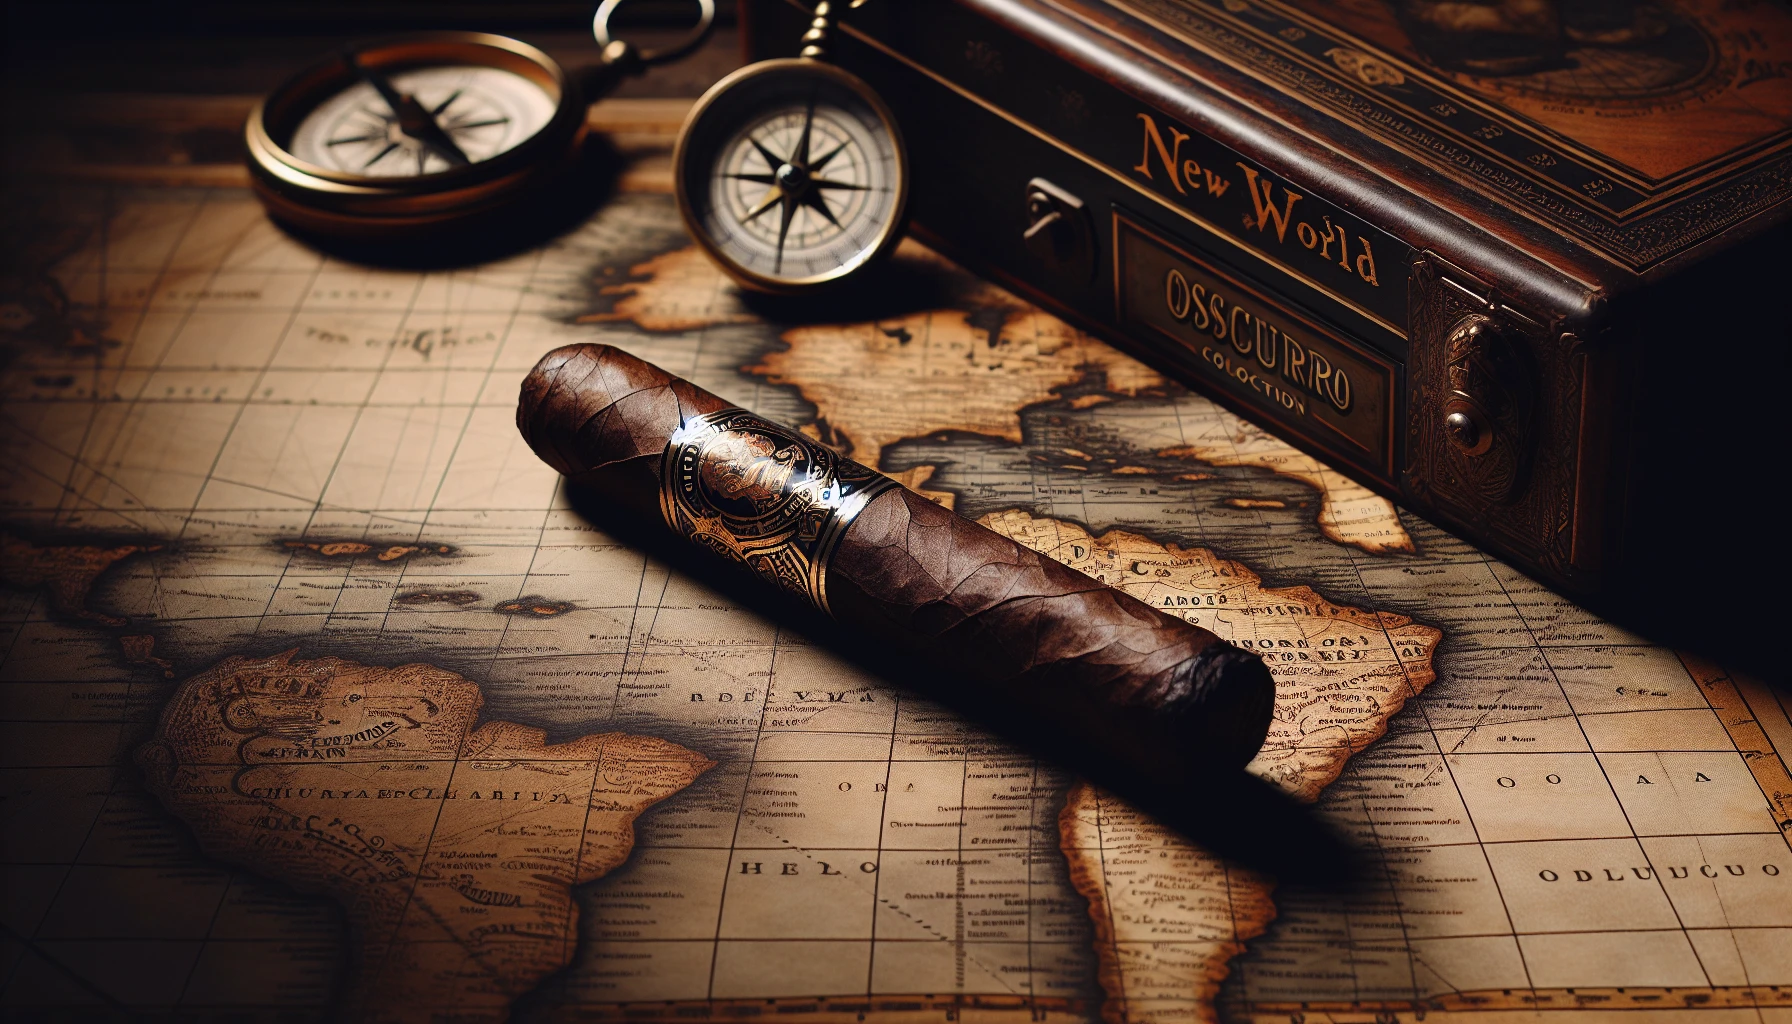 A dark, rich cigar with complex flavors, inspired by the New World discovery